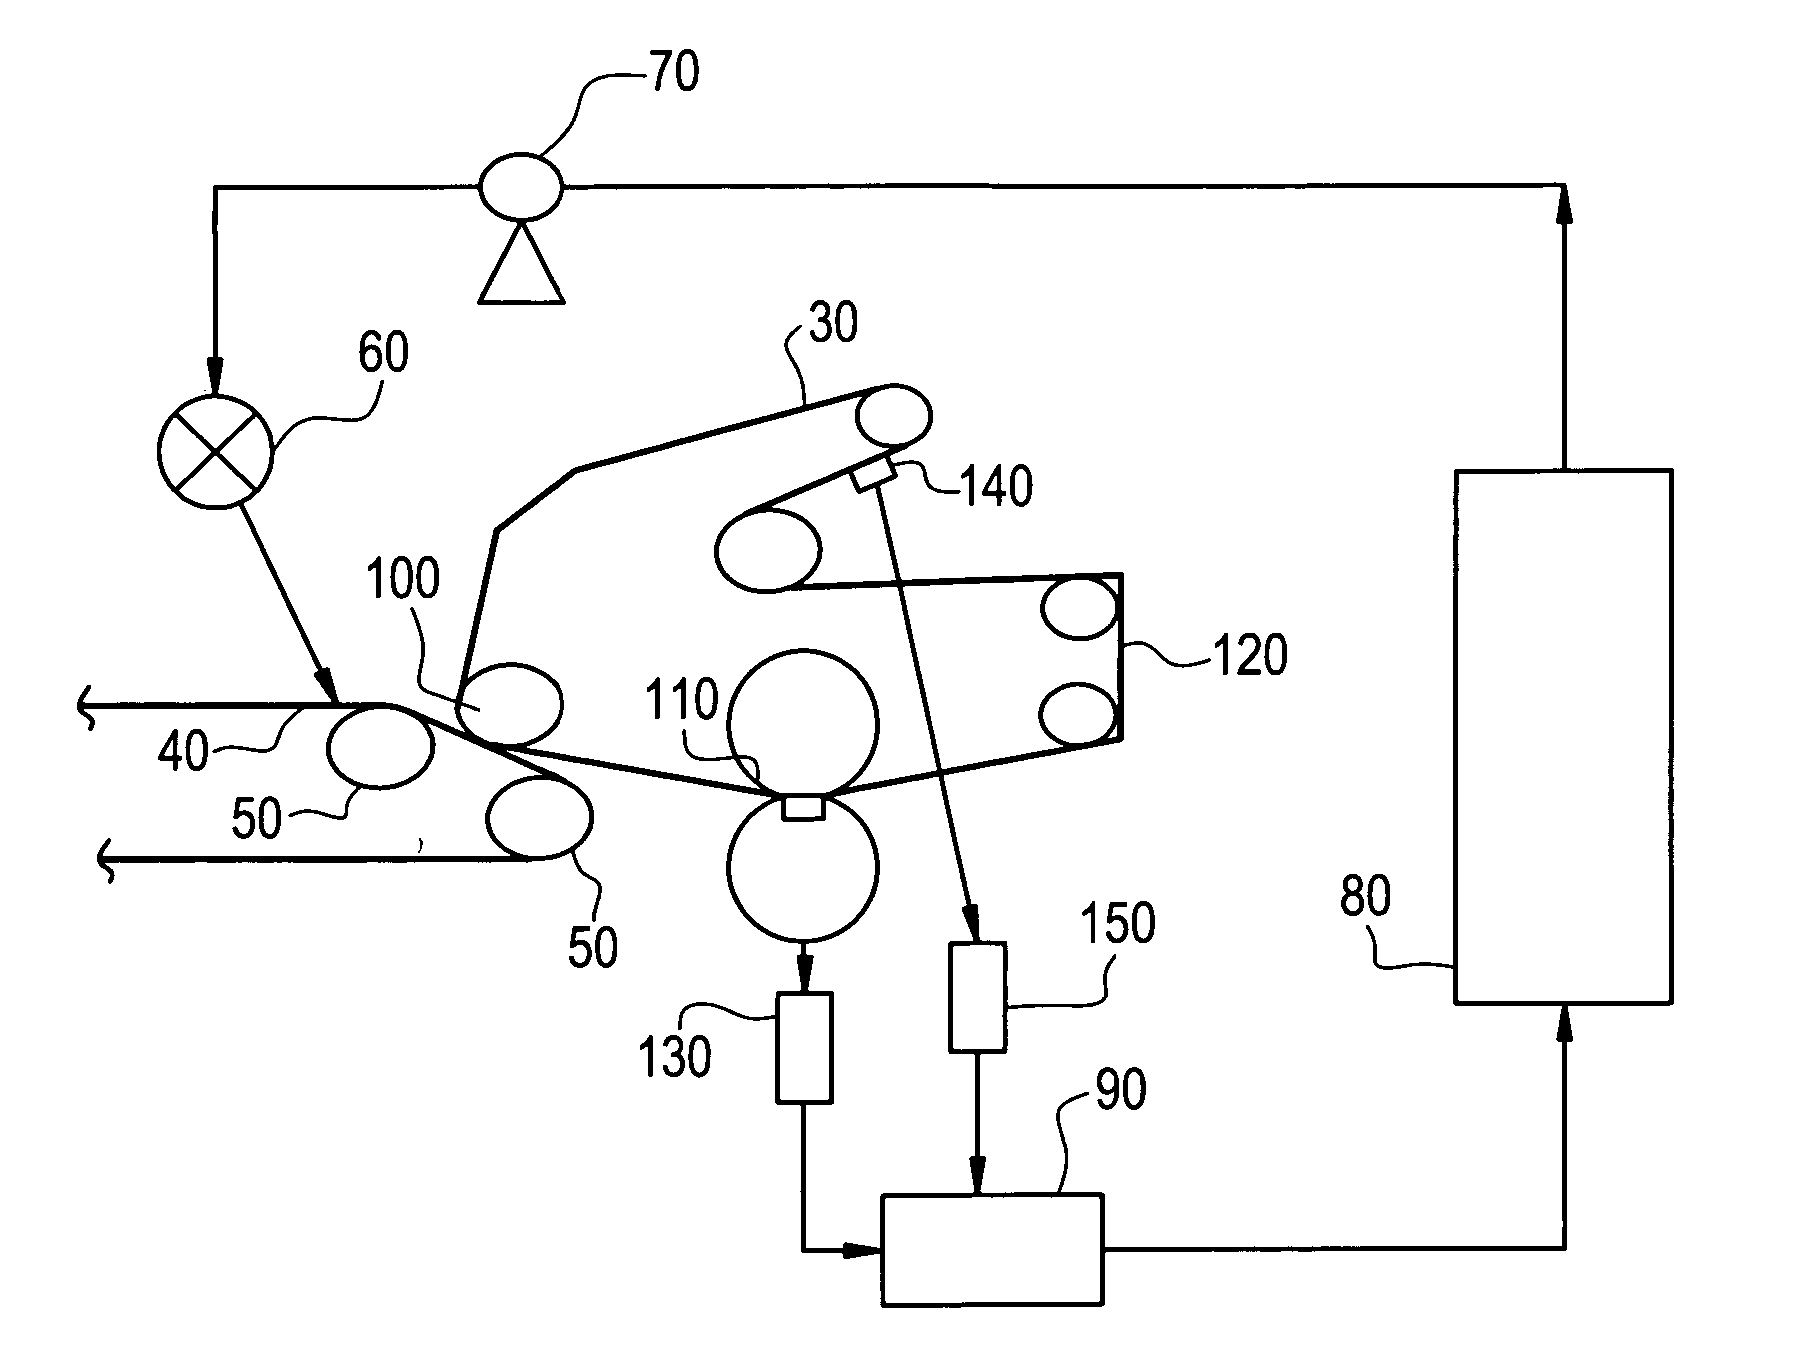 System and method to control press section dewatering on paper and pulp drying machines using chemical dewatering agents